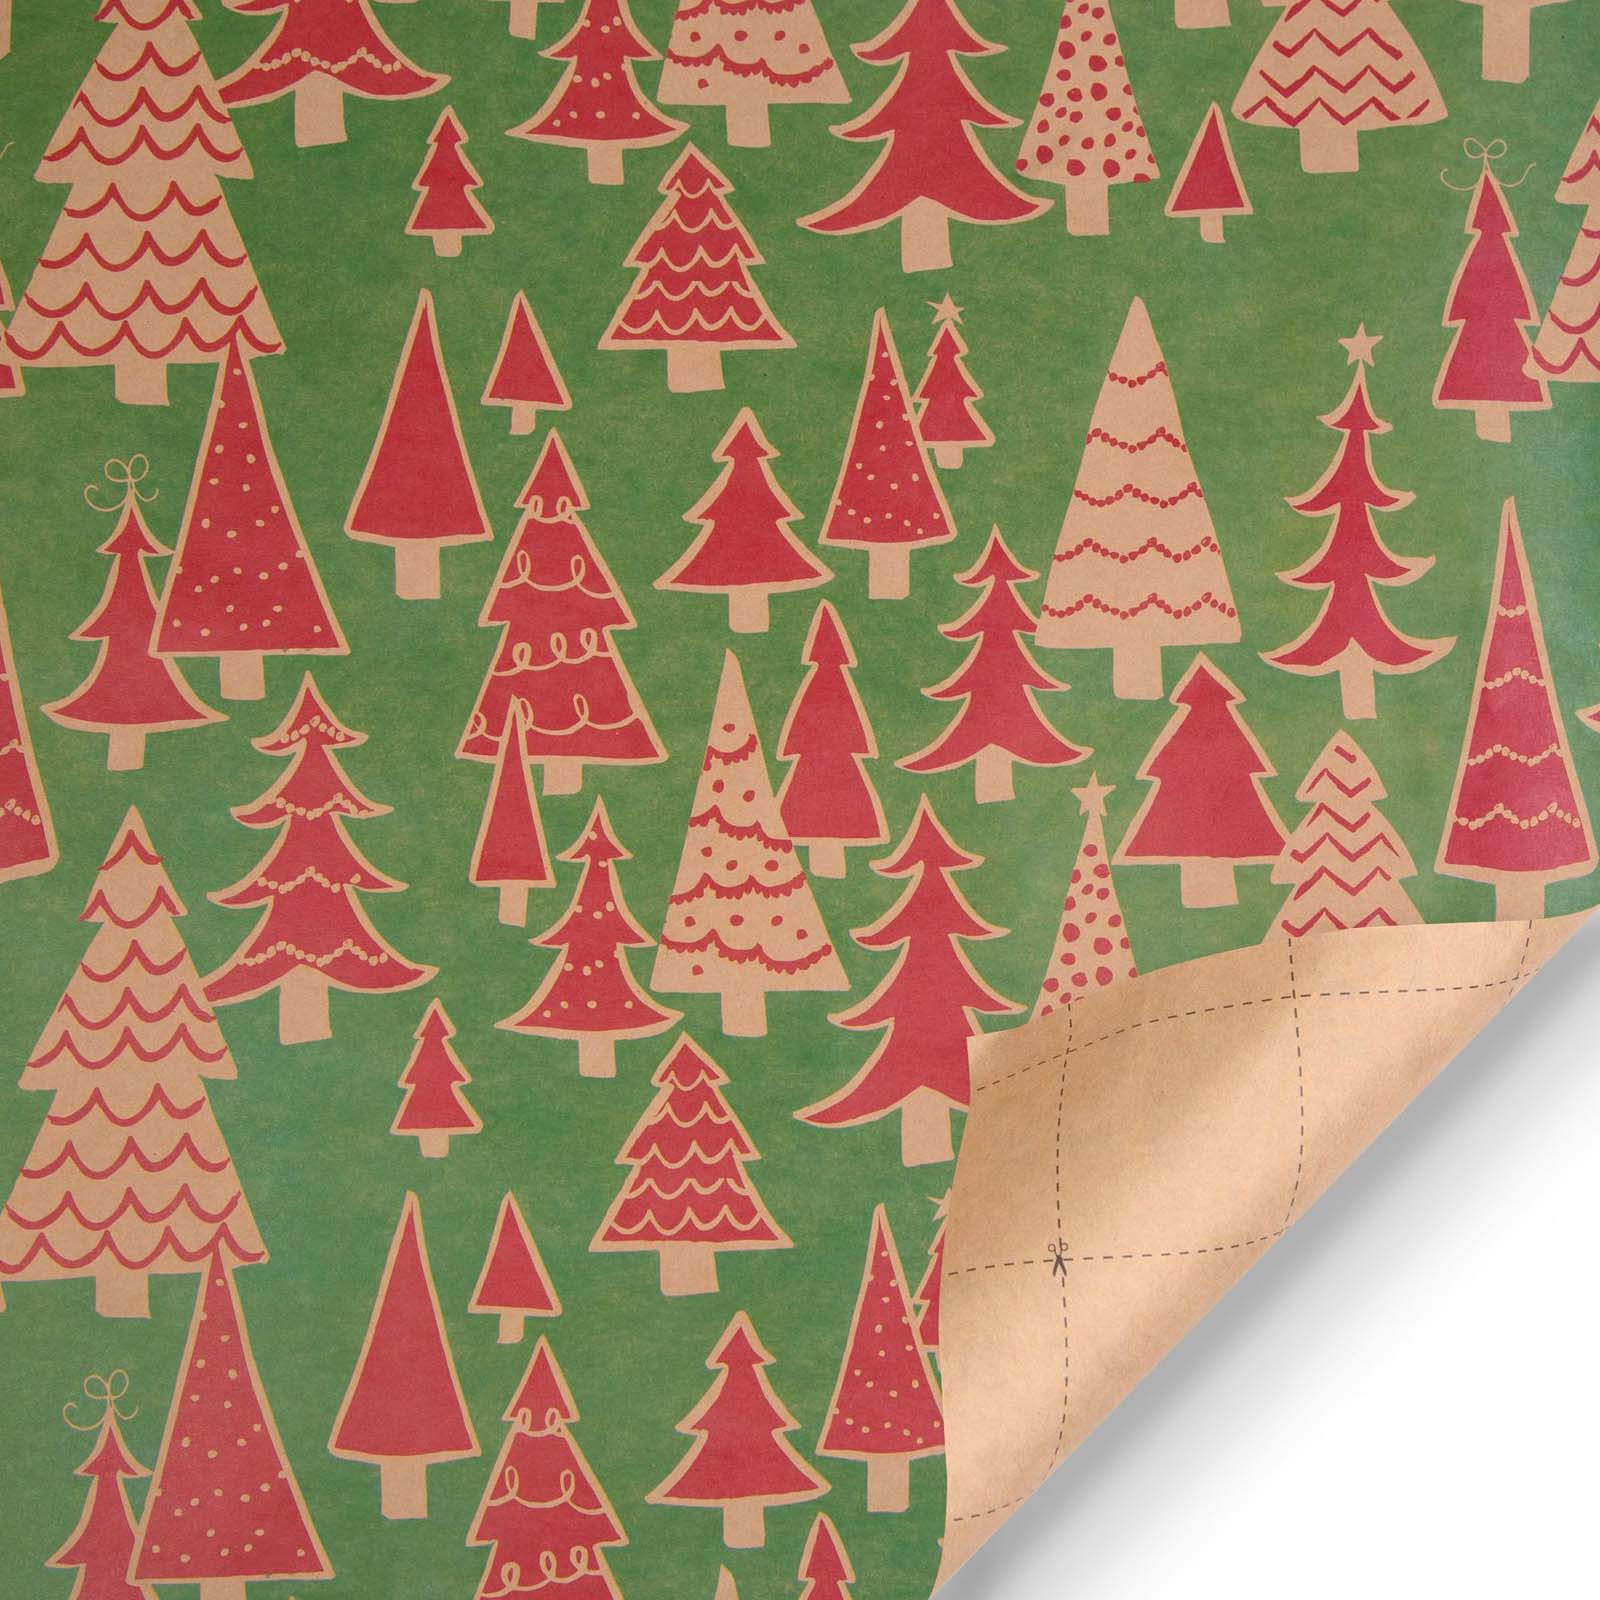 Christmas Decorations Clearance,Christmas Wrapping Paper Christmas